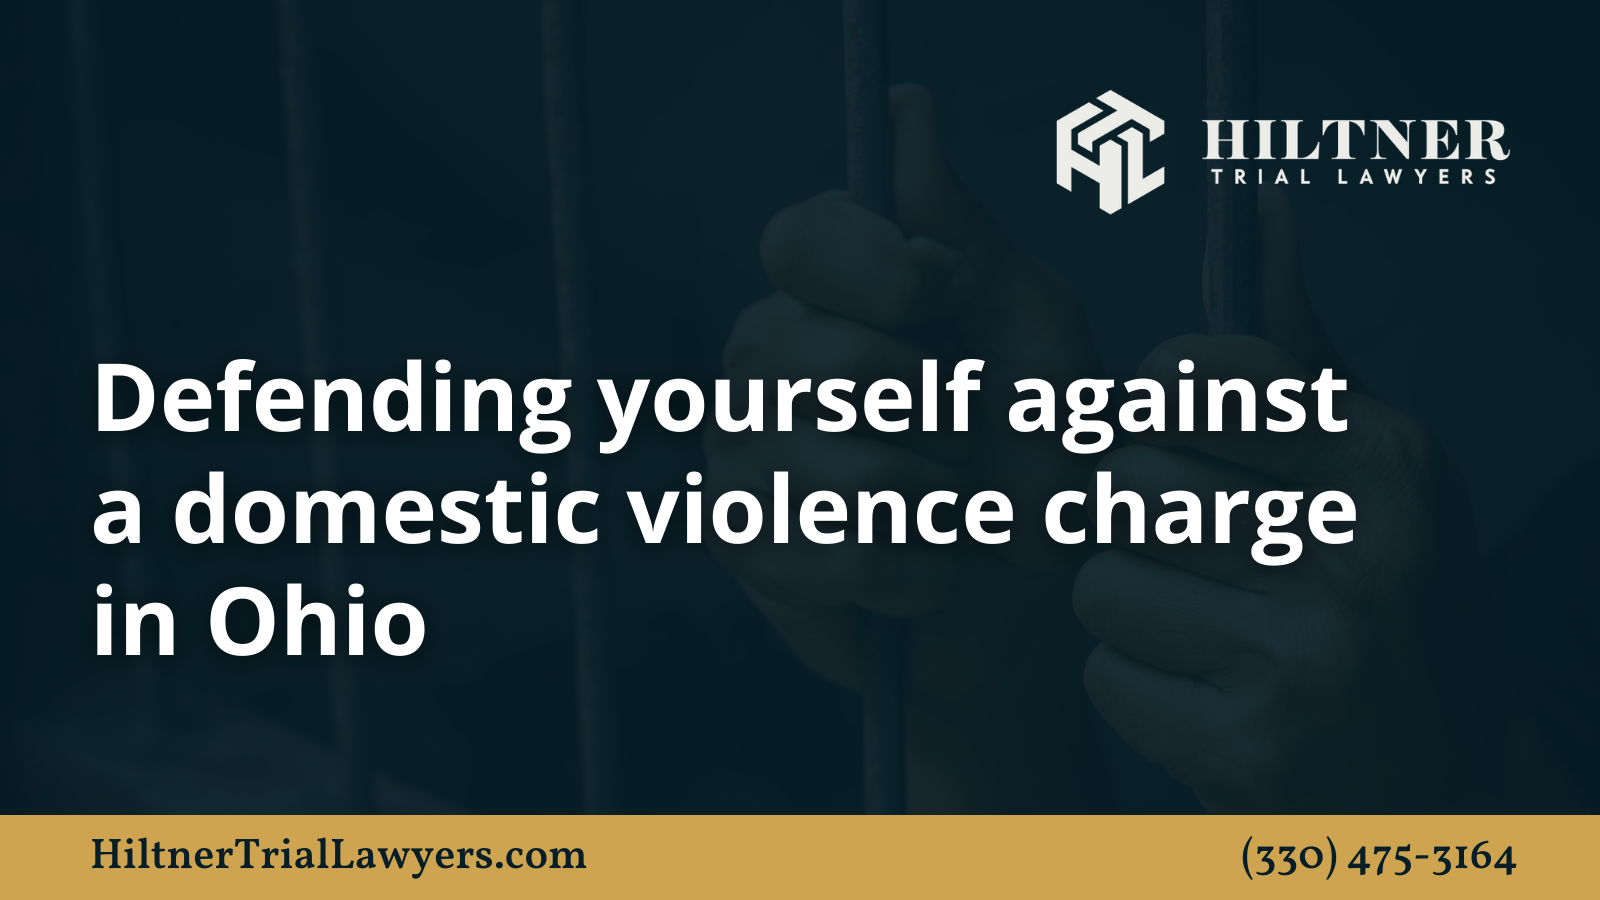 Defending yourself against a domestic violence charge in Ohio - Hiltner Trial Lawyers Ohio - max hiltner